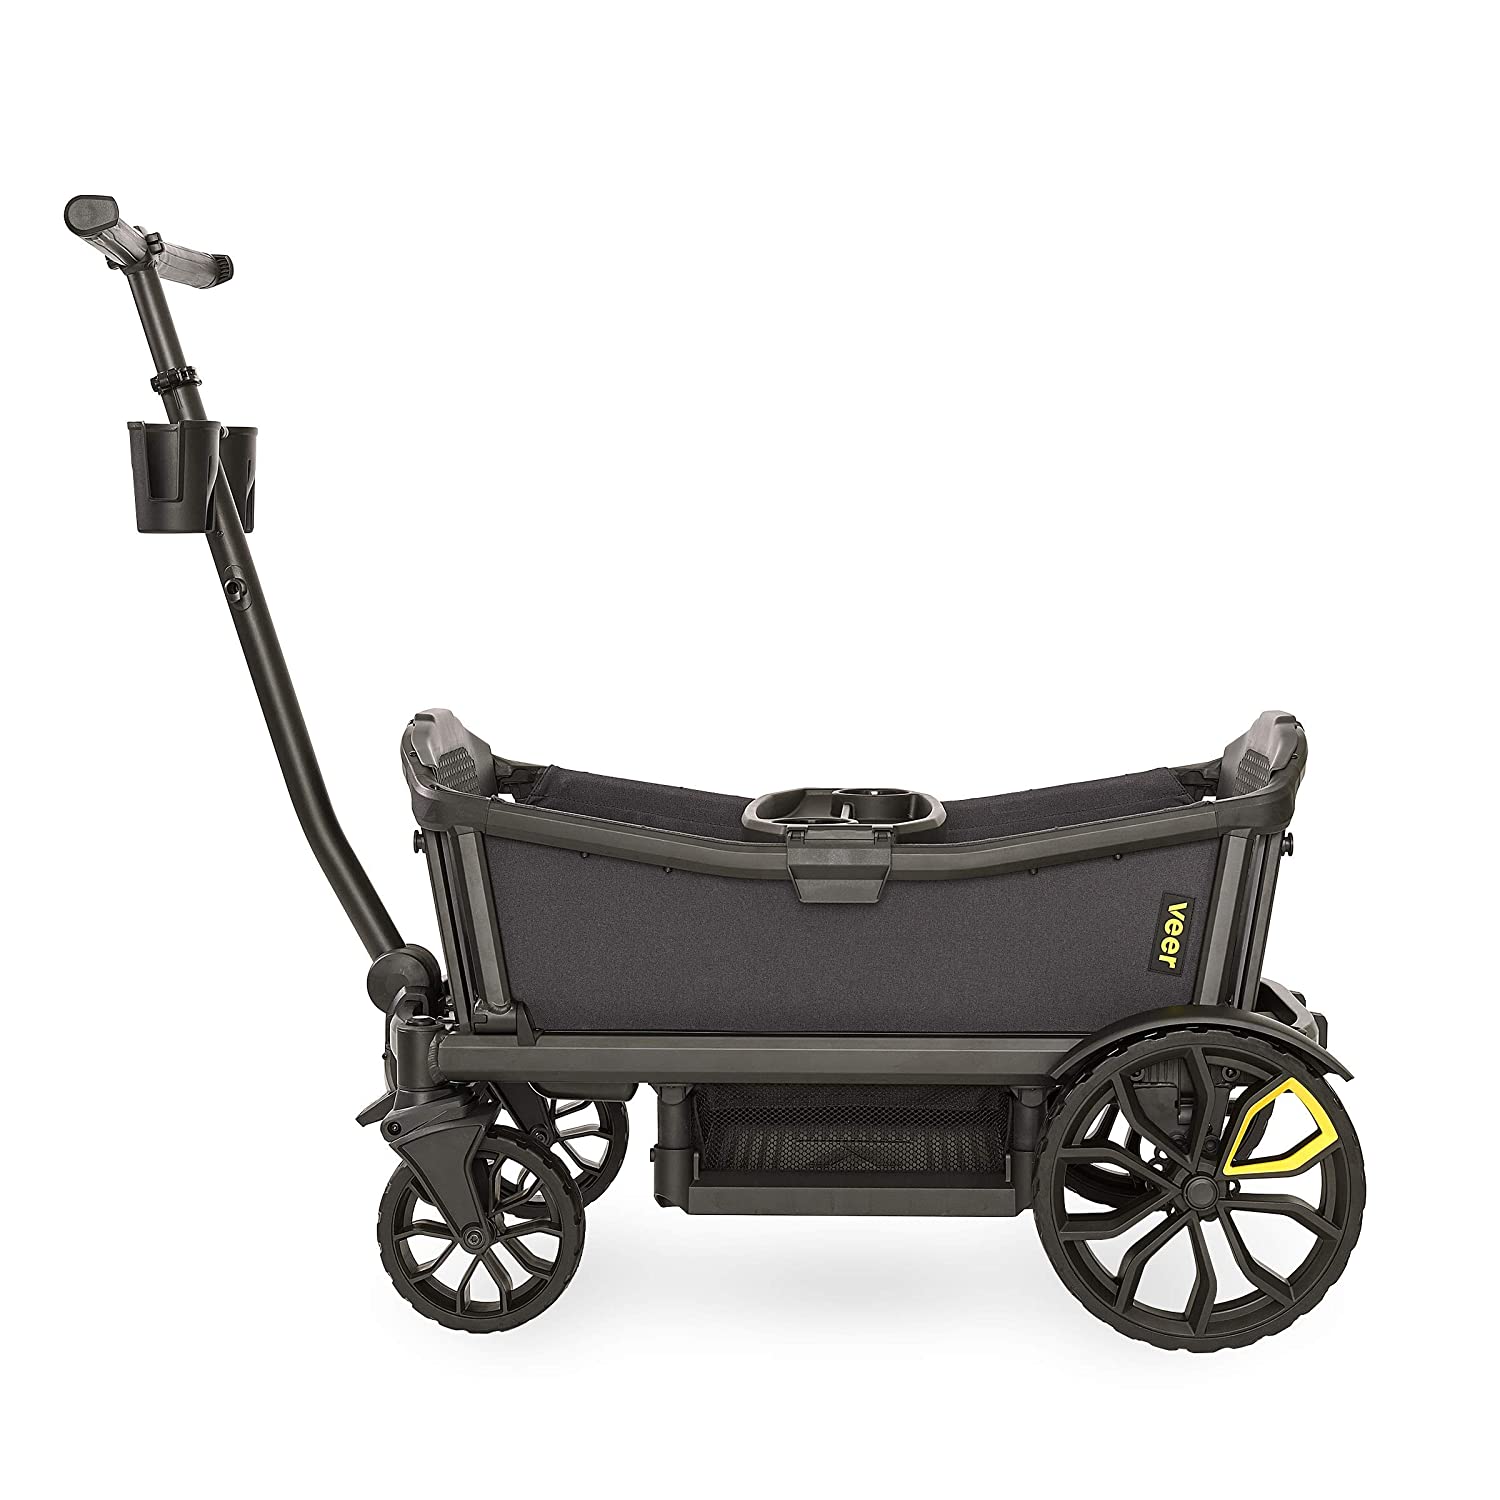 Top 10 Best Wagons for Kids Reviews in 2022 9